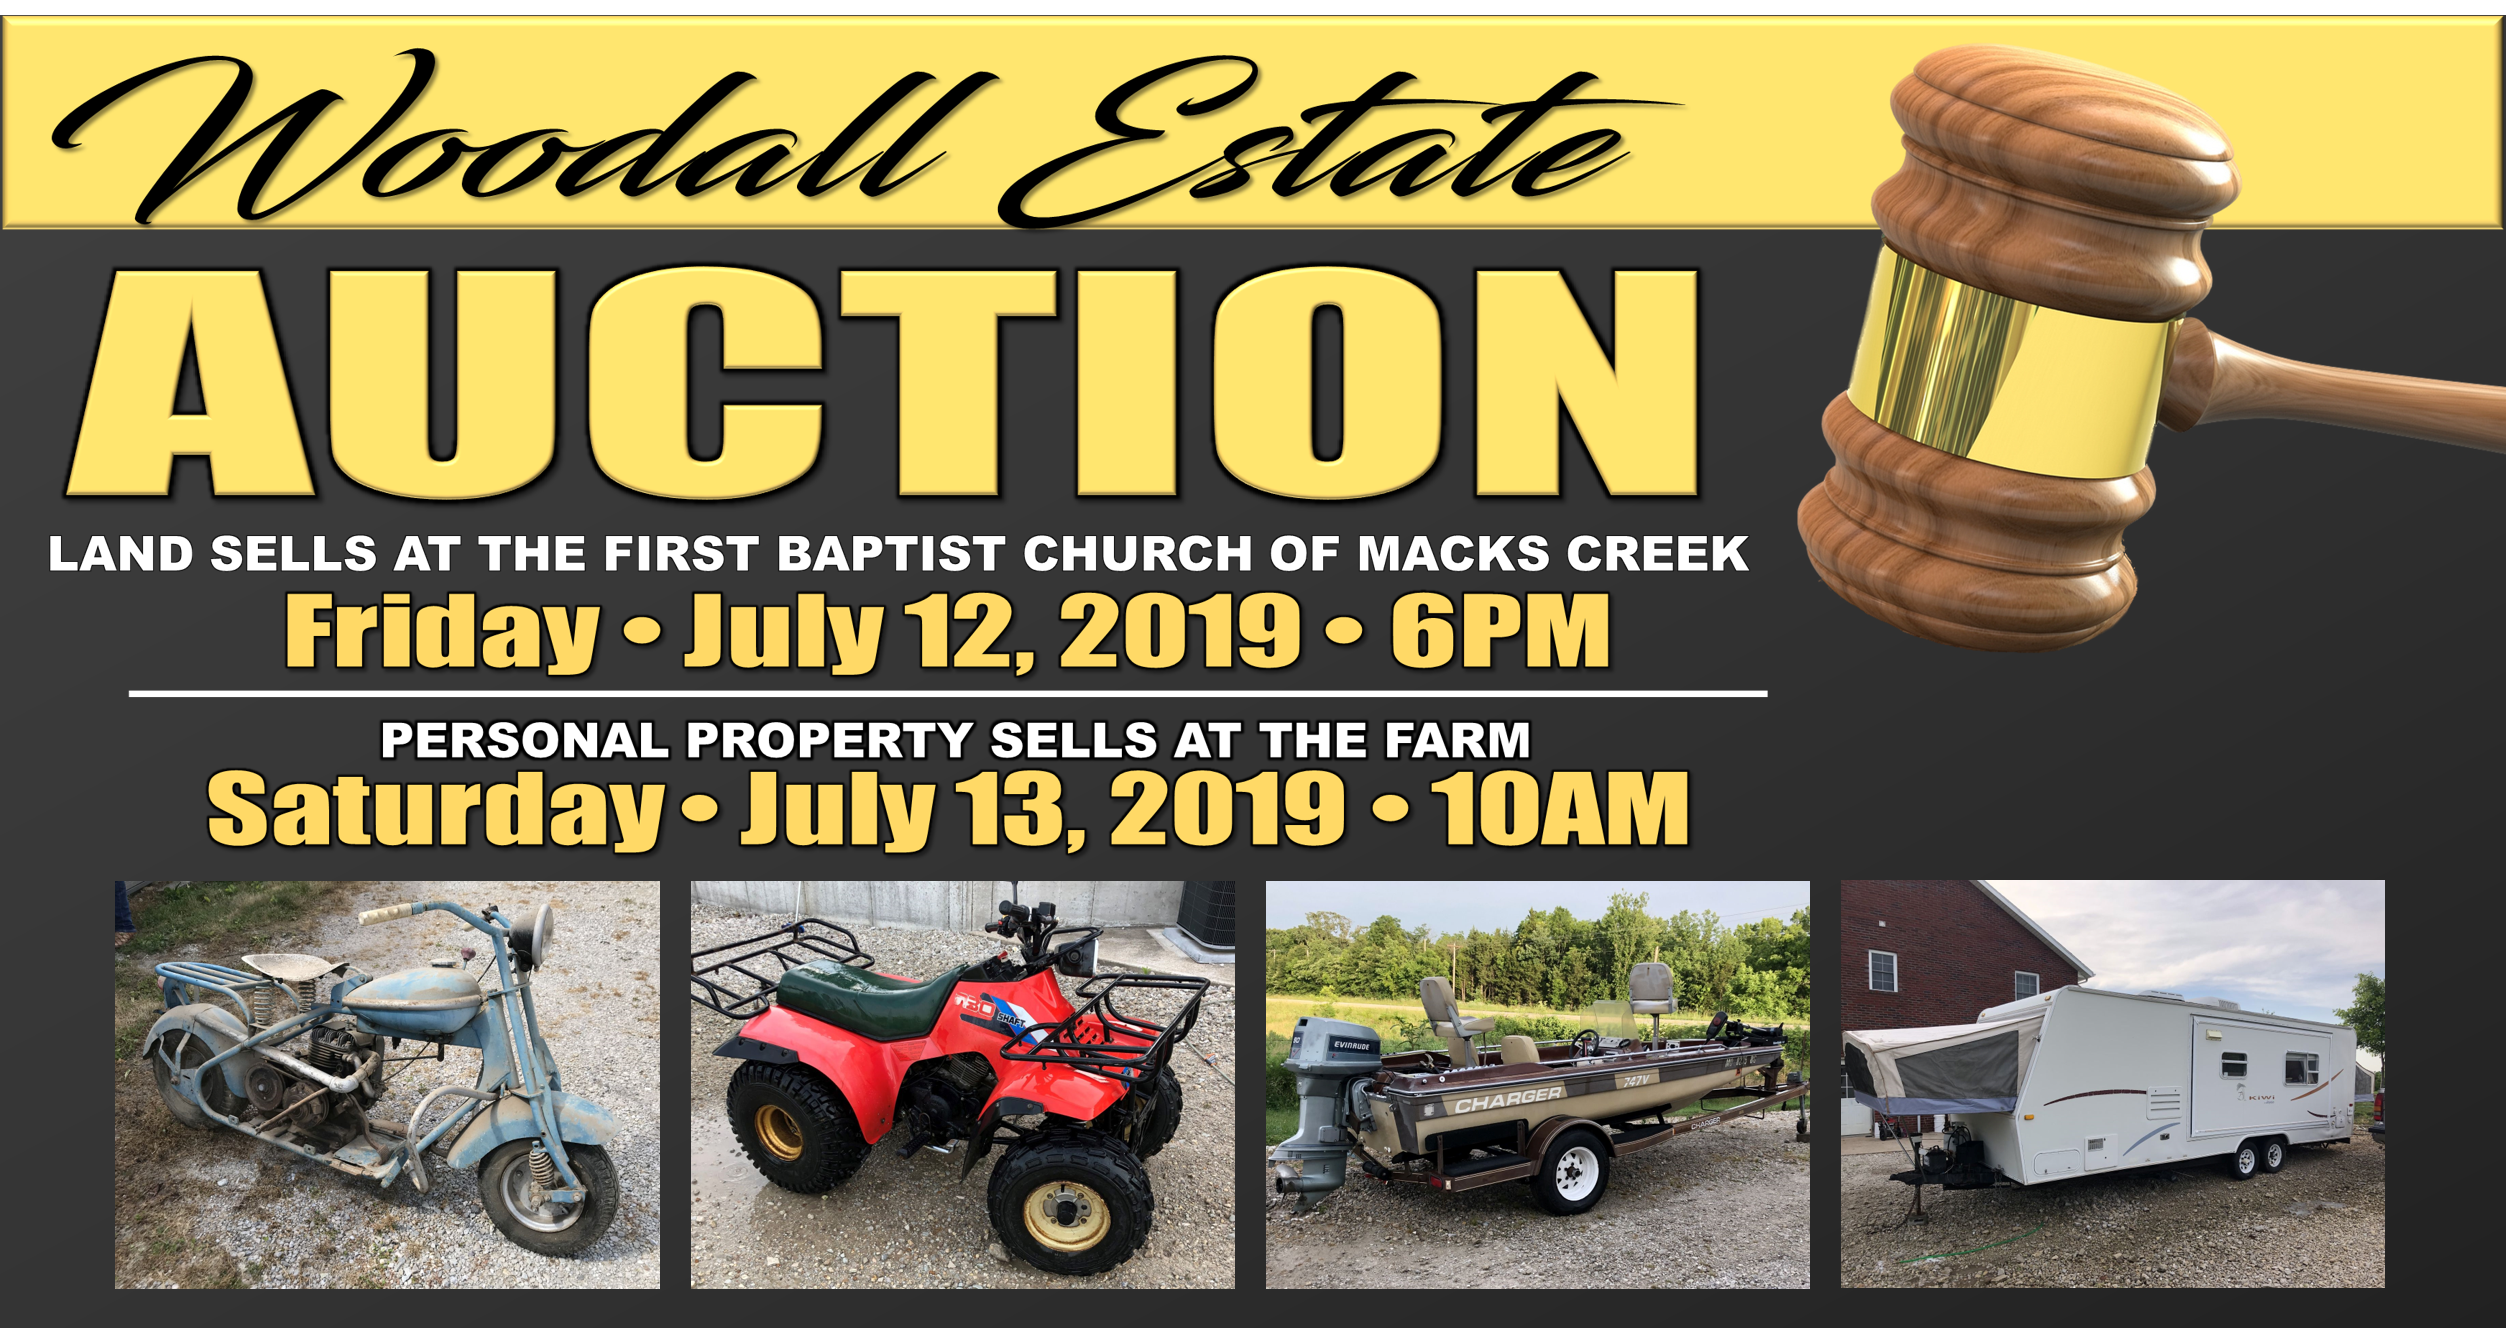 WOODALL ESTATE AUCTION